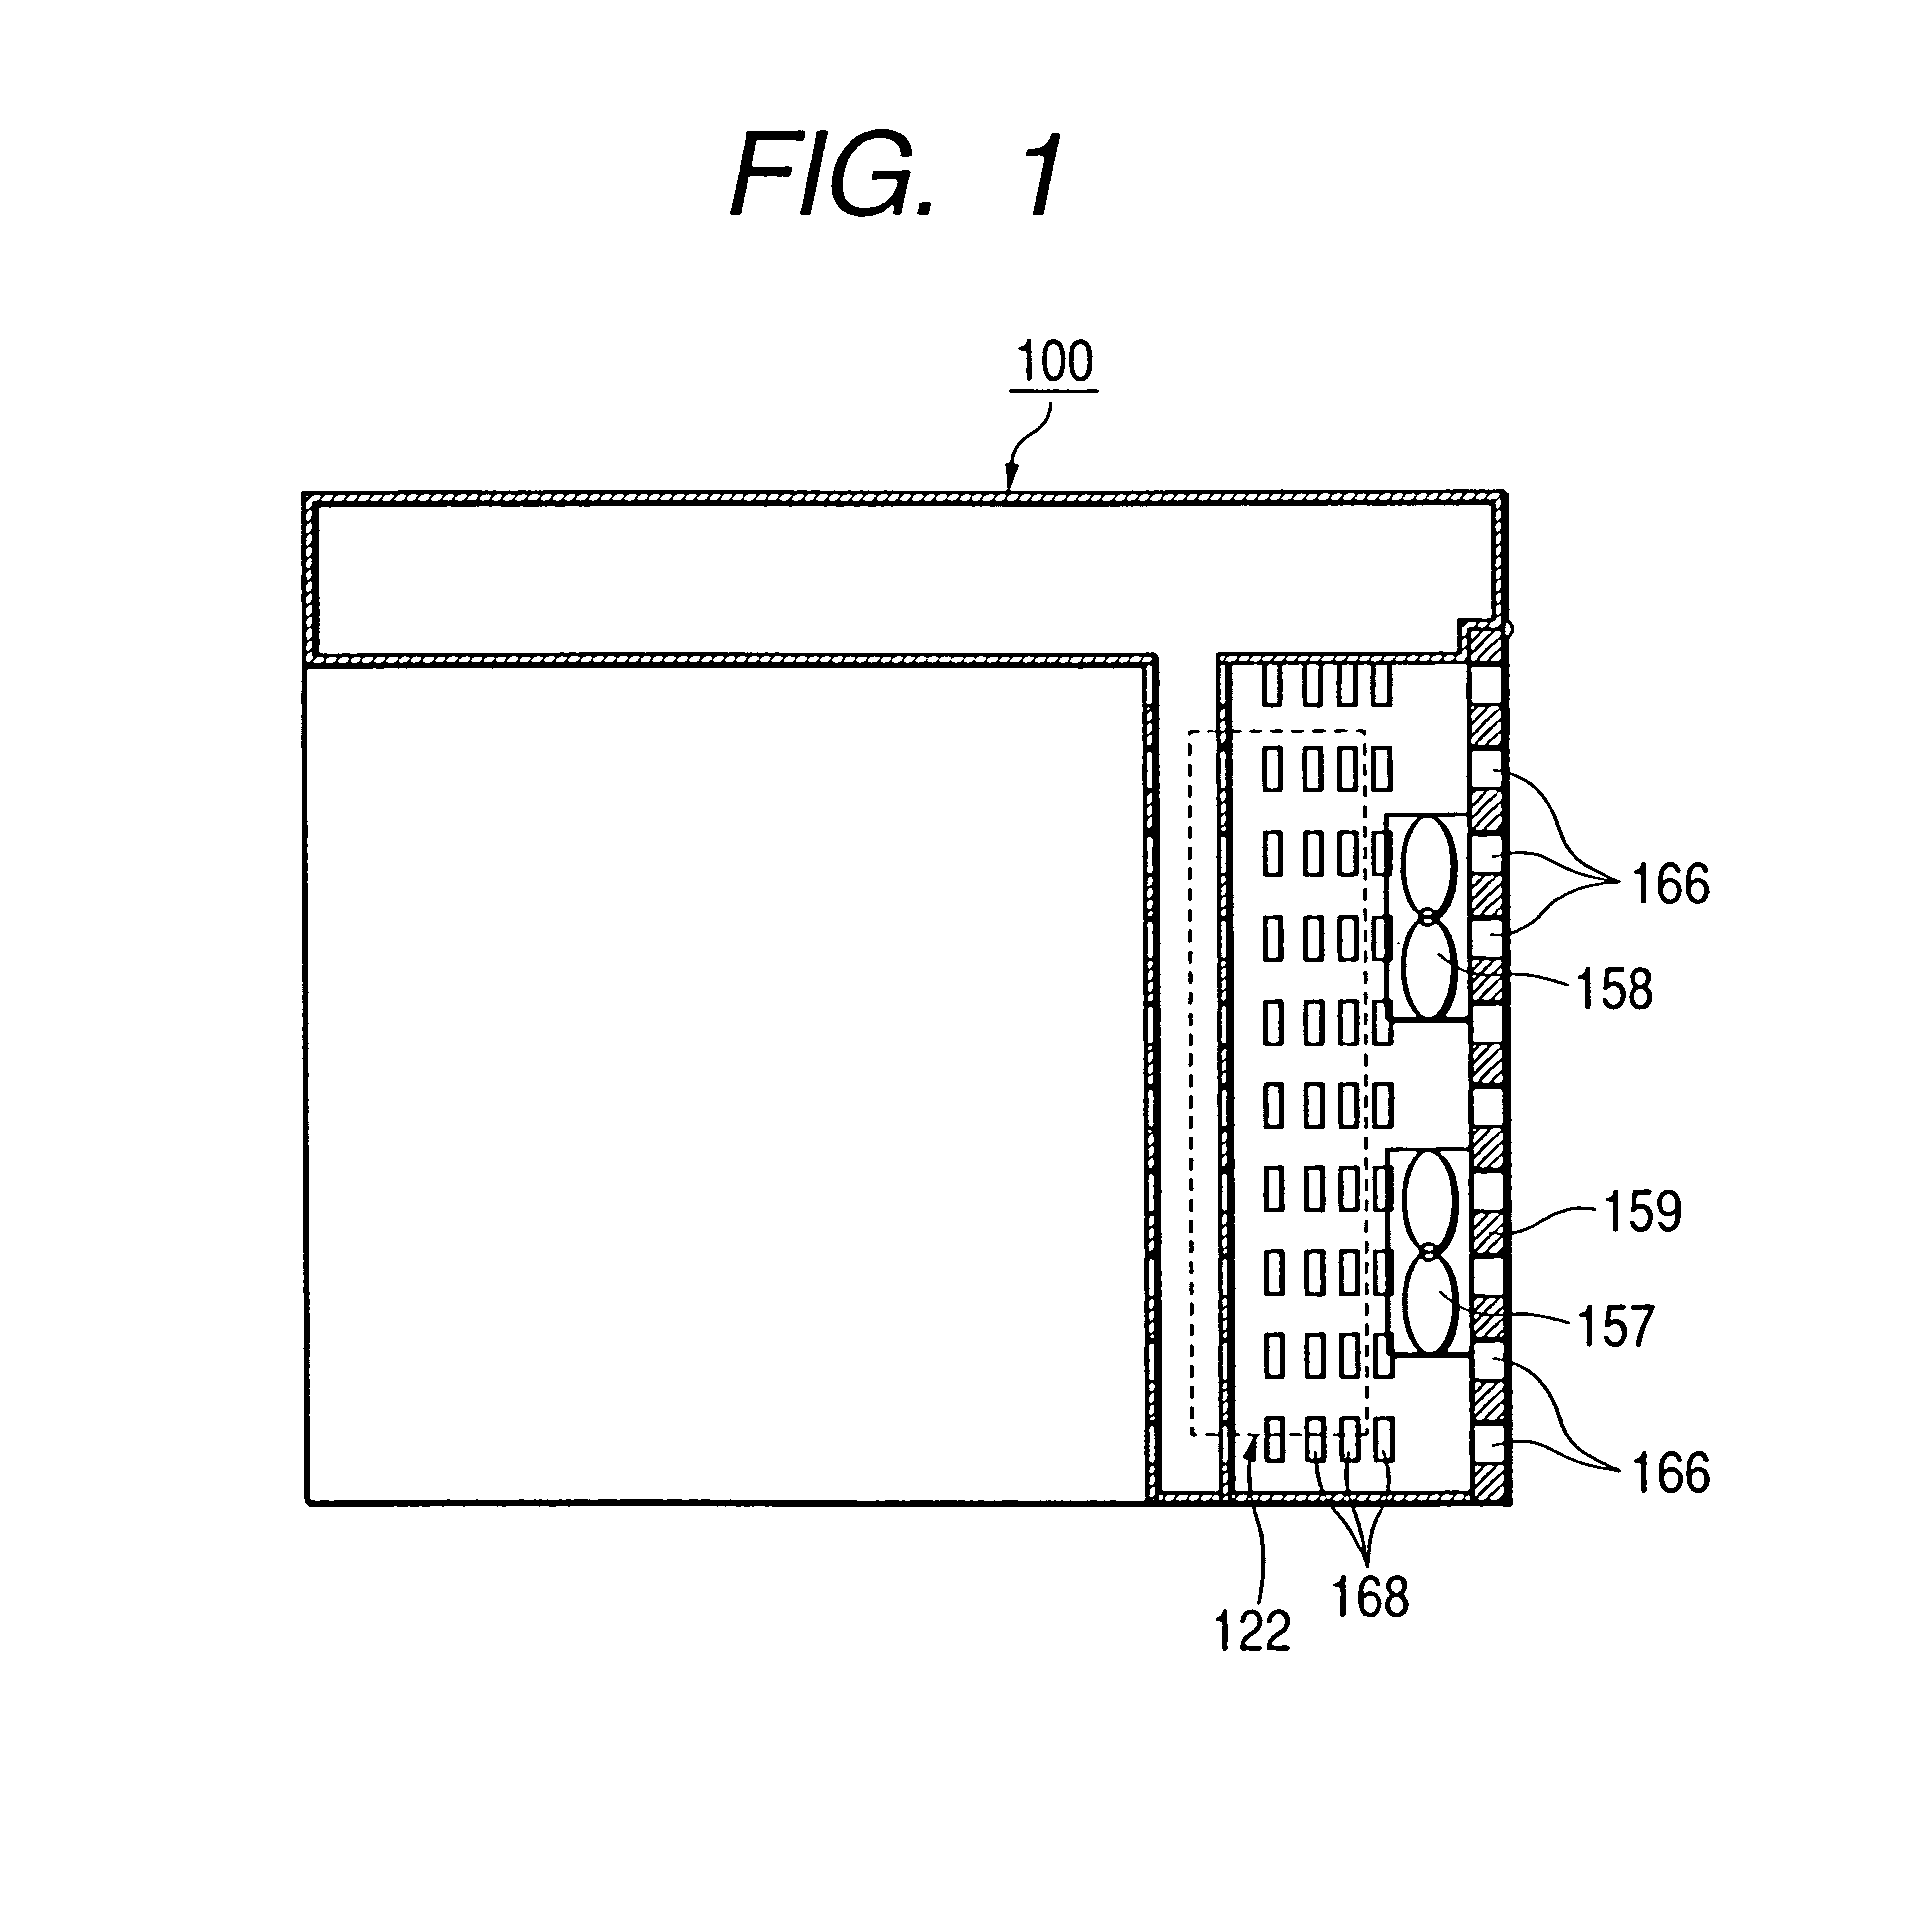 Image forming apparatus with heat exhausting means for exhausting air from around a fixing unit and a delivery tray